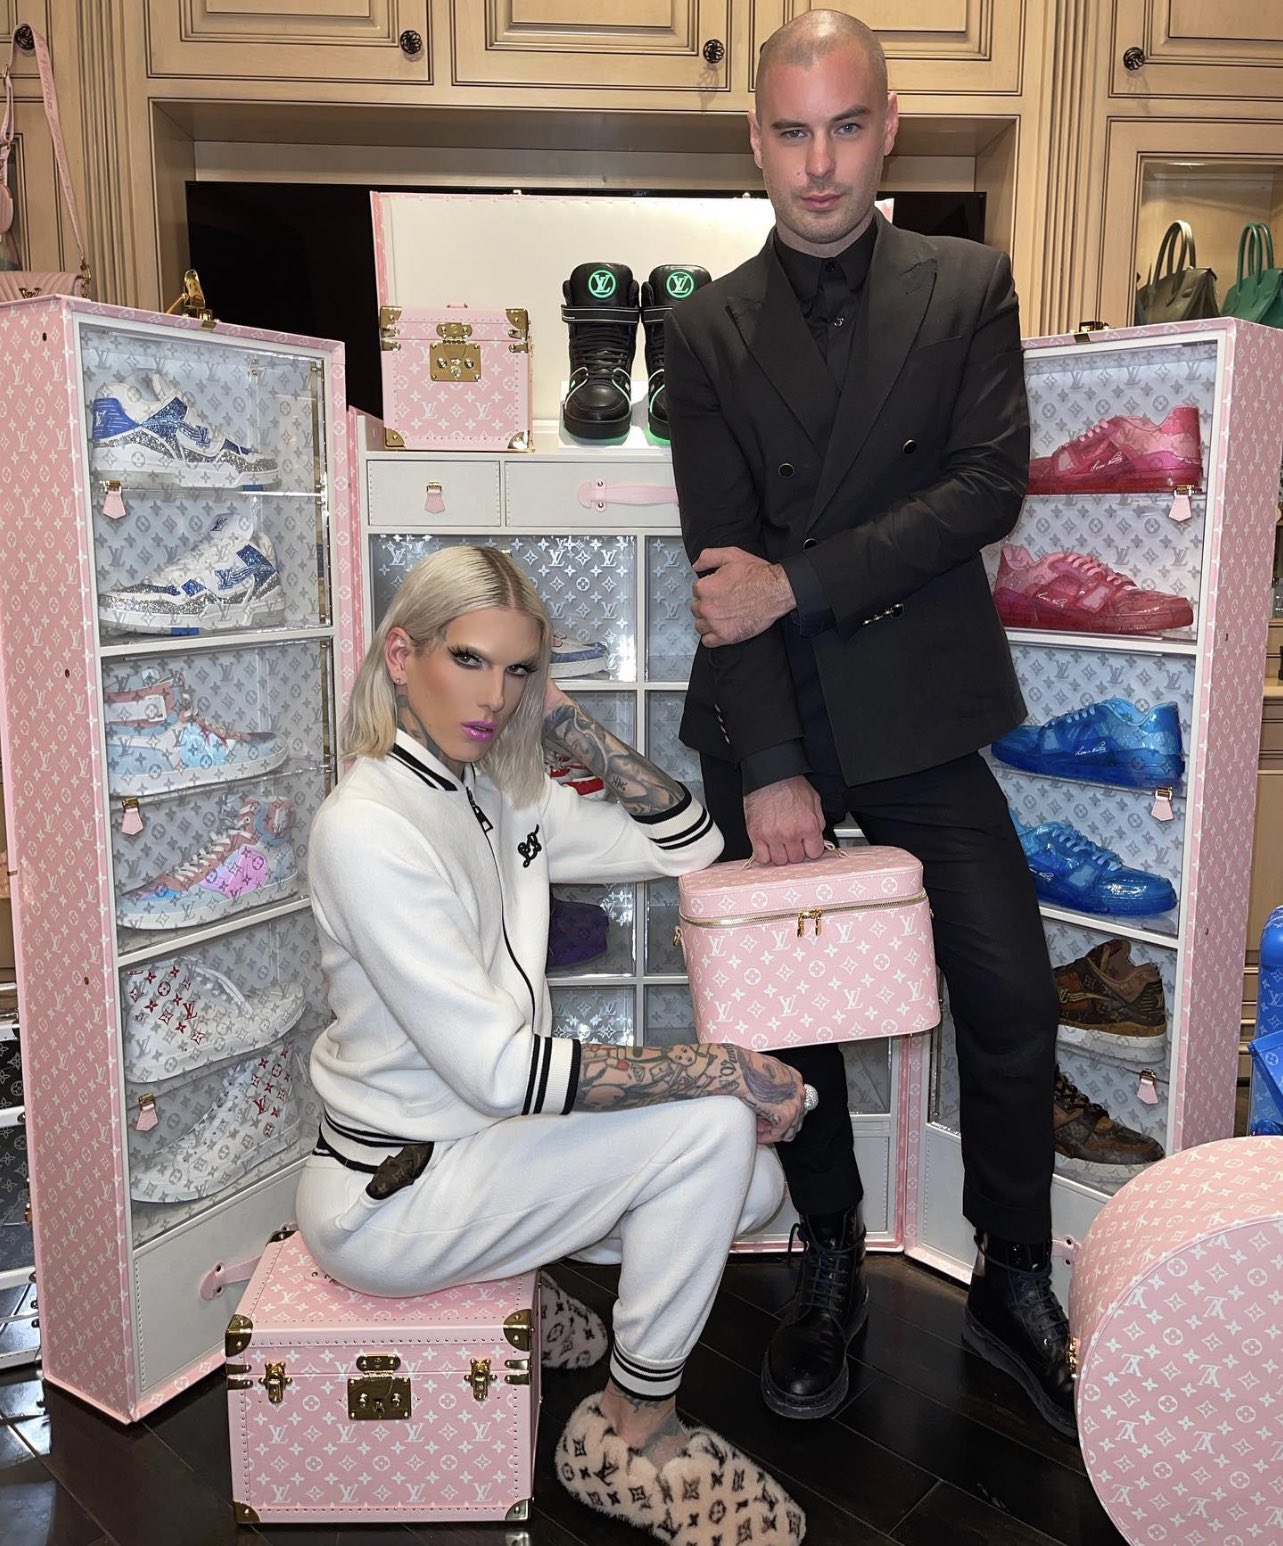 Jeffree Star's LED Louis Vuitton Sneakers: Get Pricing, Details